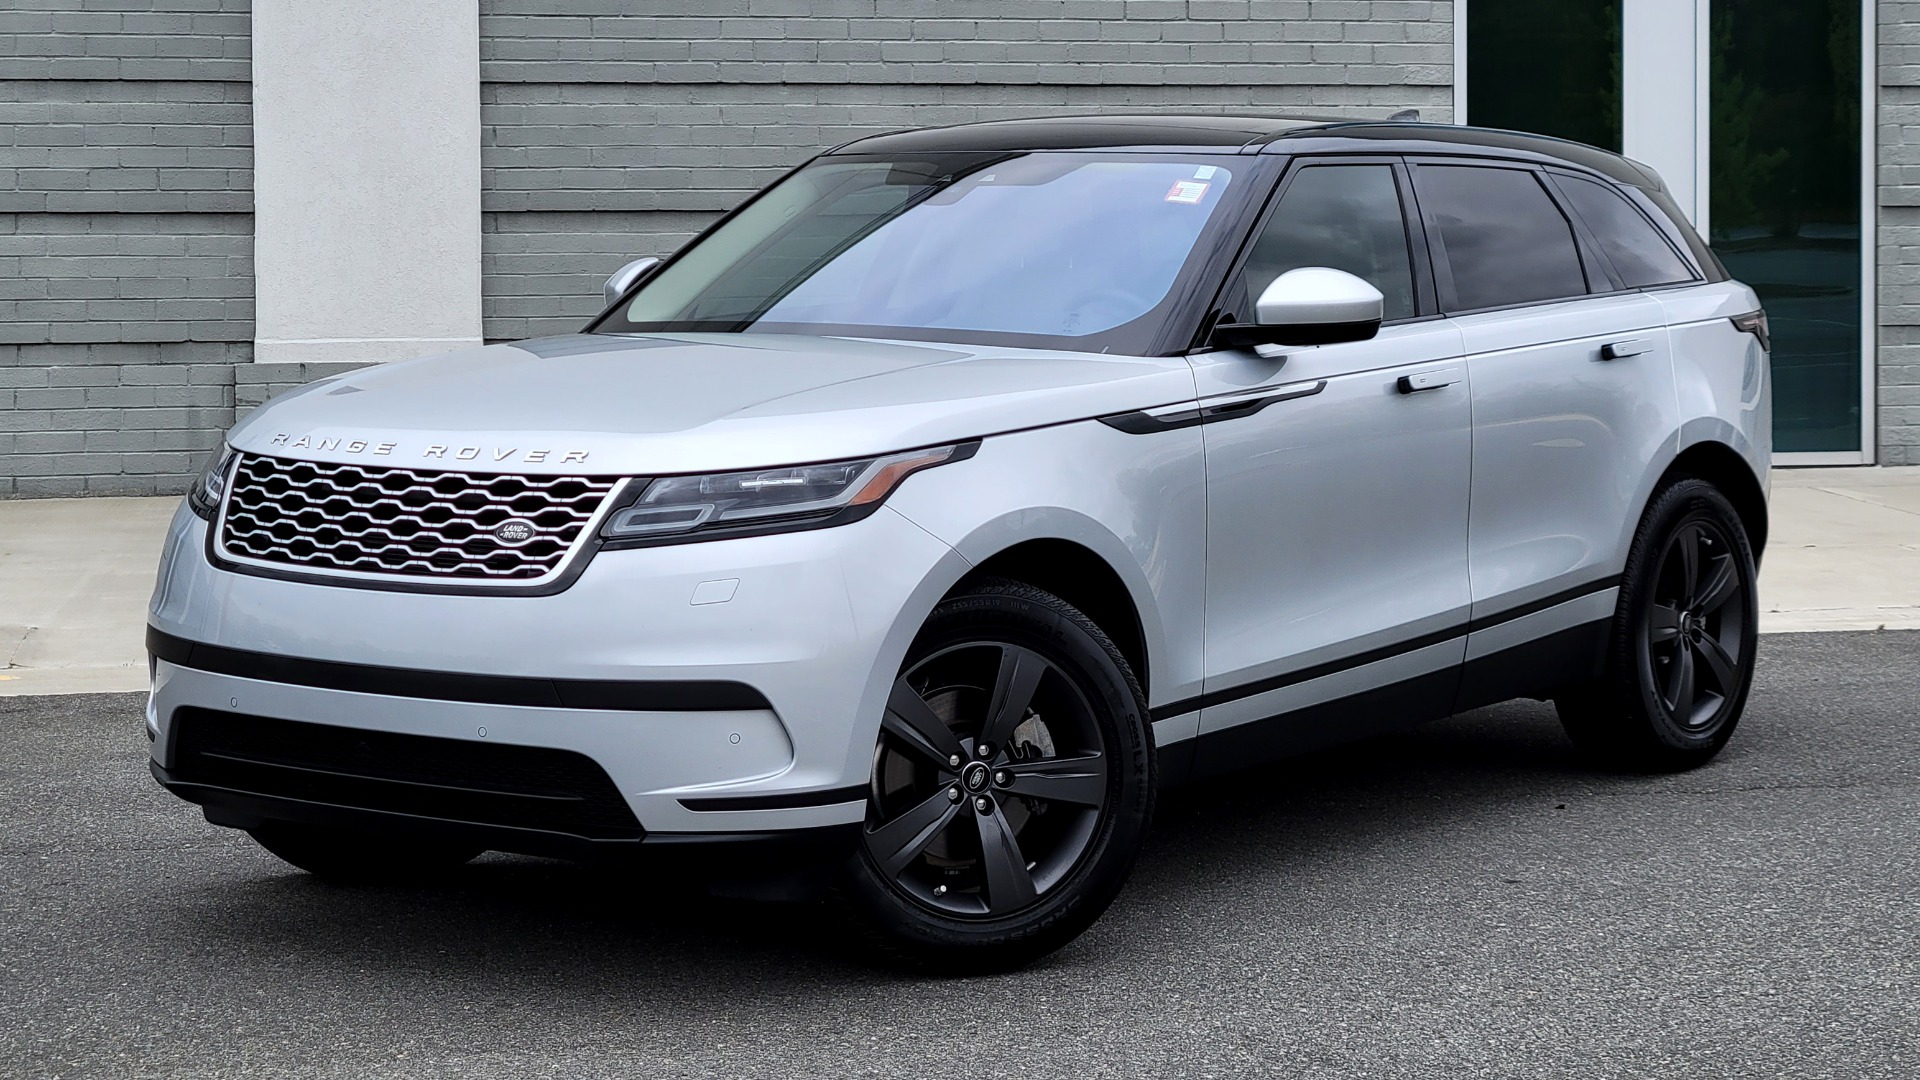 Used 2020 Land Rover RANGE ROVER VELAR S / AWD / 2.0L TURBO / NAV / SUNROOF / 19IN WHLS / REARVIEW for sale $59,995 at Formula Imports in Charlotte NC 28227 1